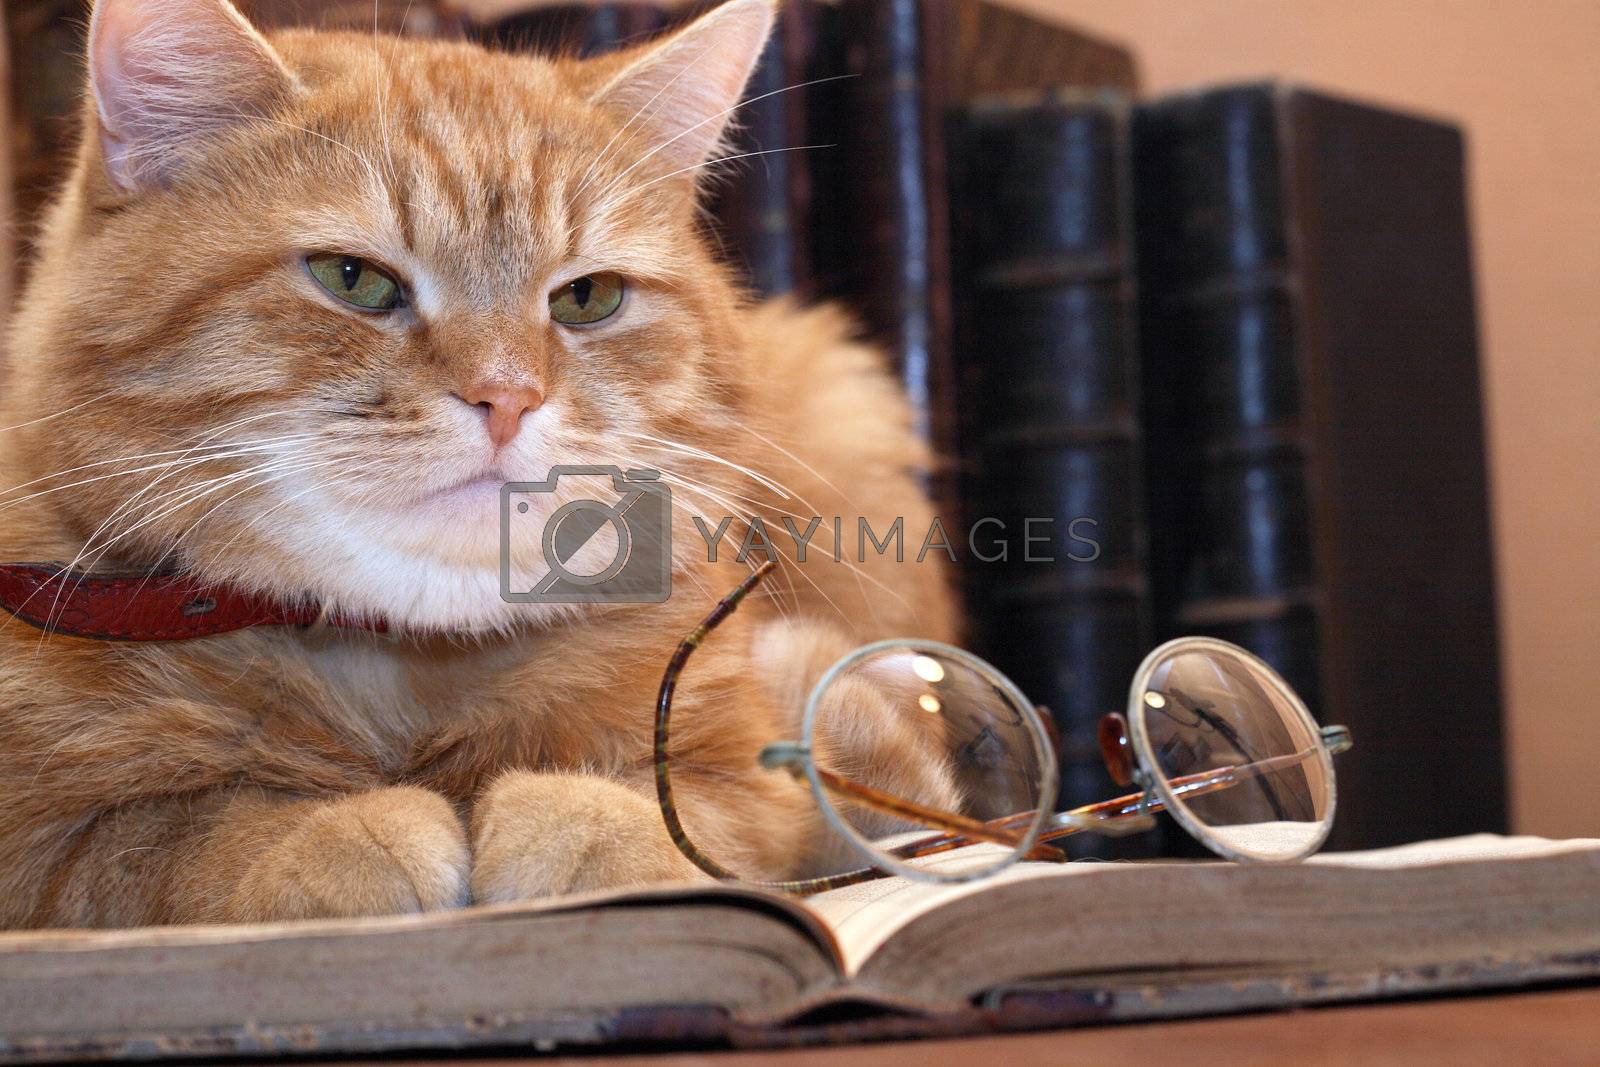 Royalty free image of Clever Cat by kvkirillov